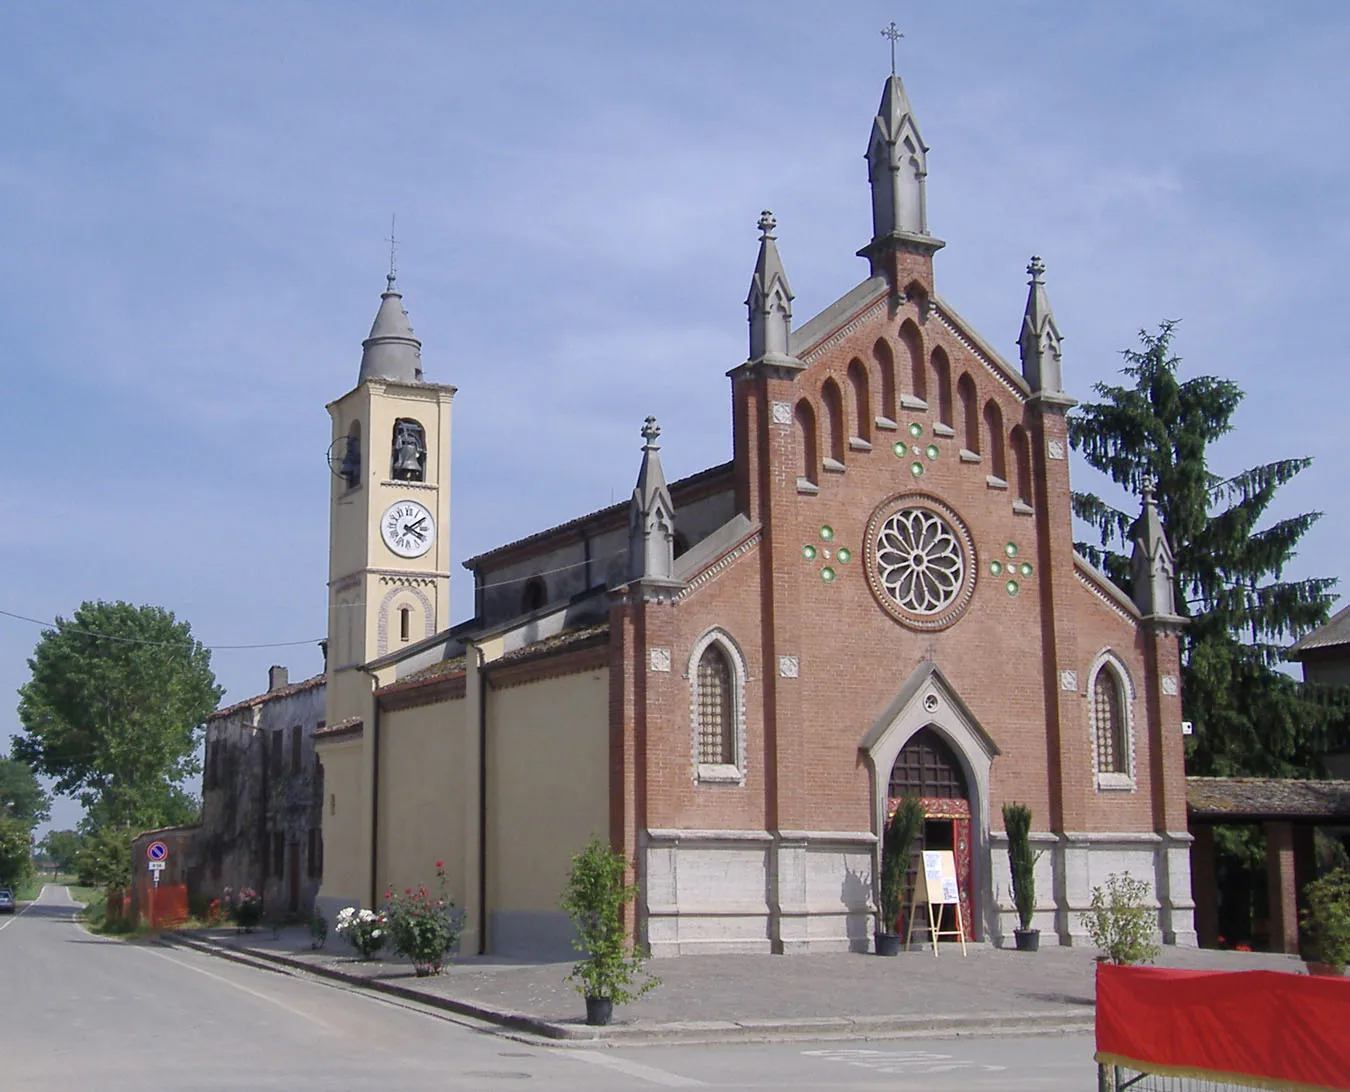 Photo showing: St Jorge church in Maccstrona, Italy.